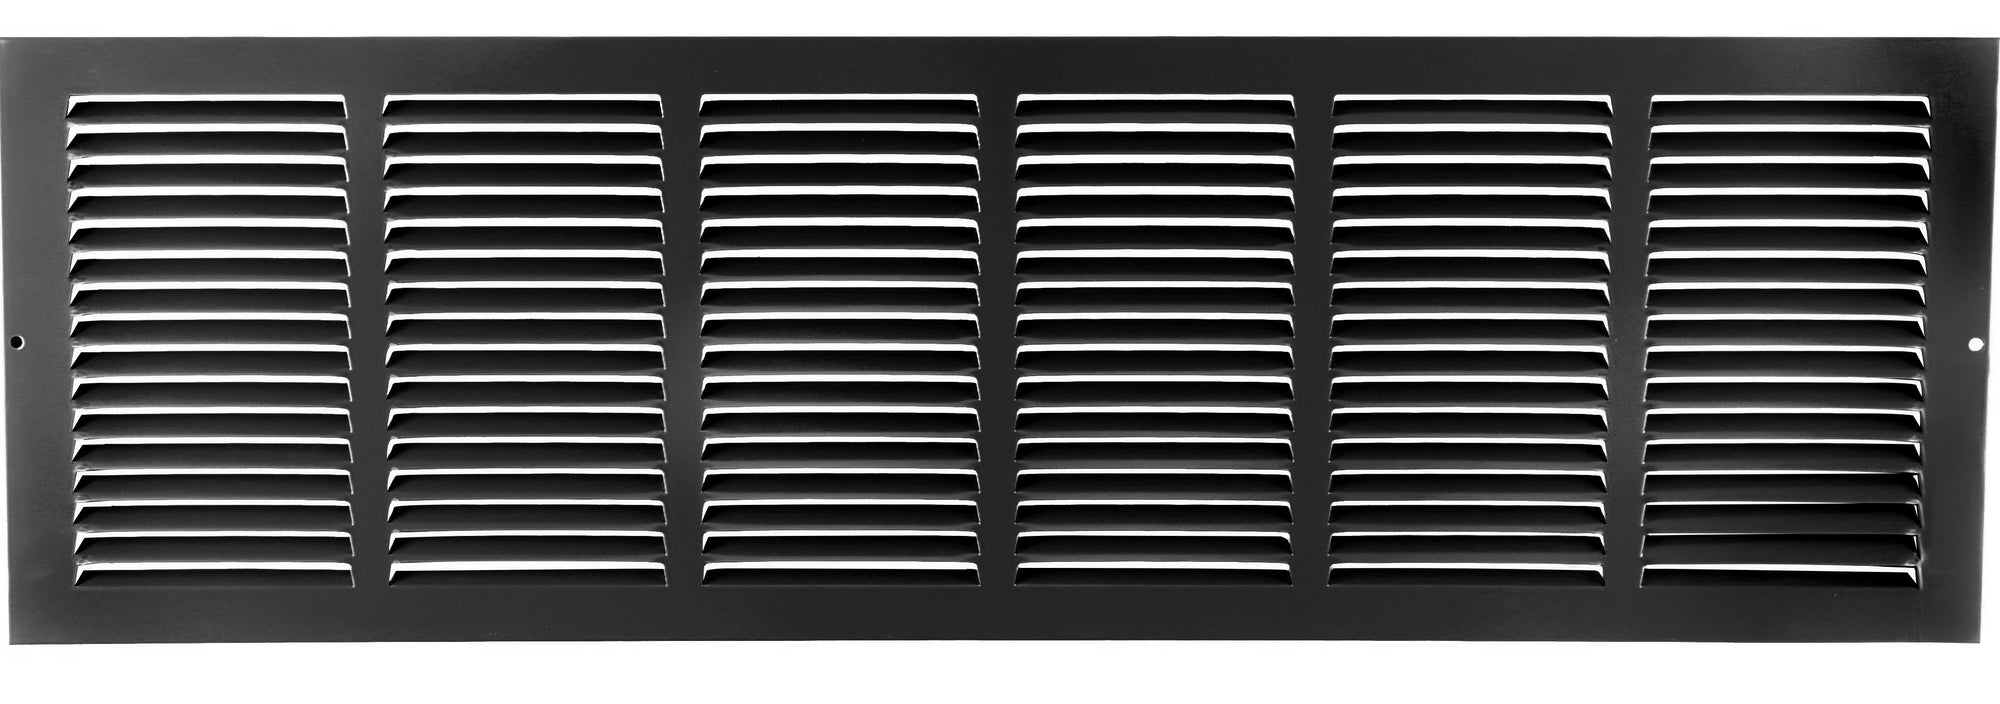 30" X 6" Air Vent Return Grilles - Sidewall and Ceiling - Steel